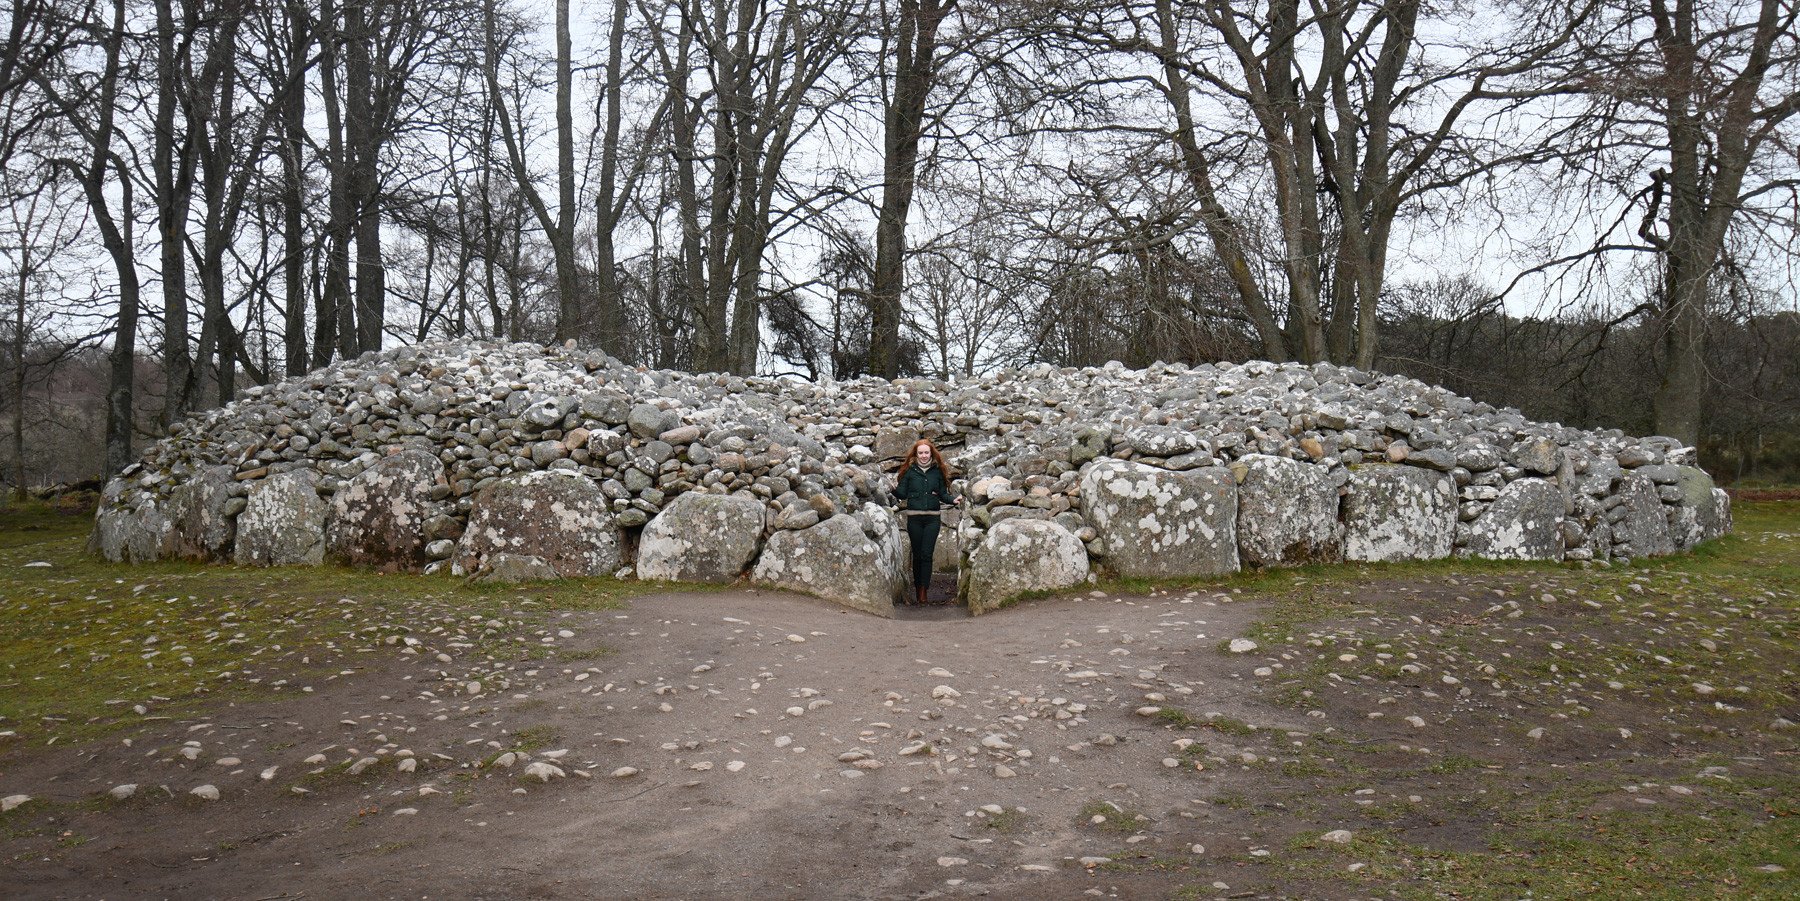 Visiting the Clava Cairns, near Inverness in the Scottish Highlands